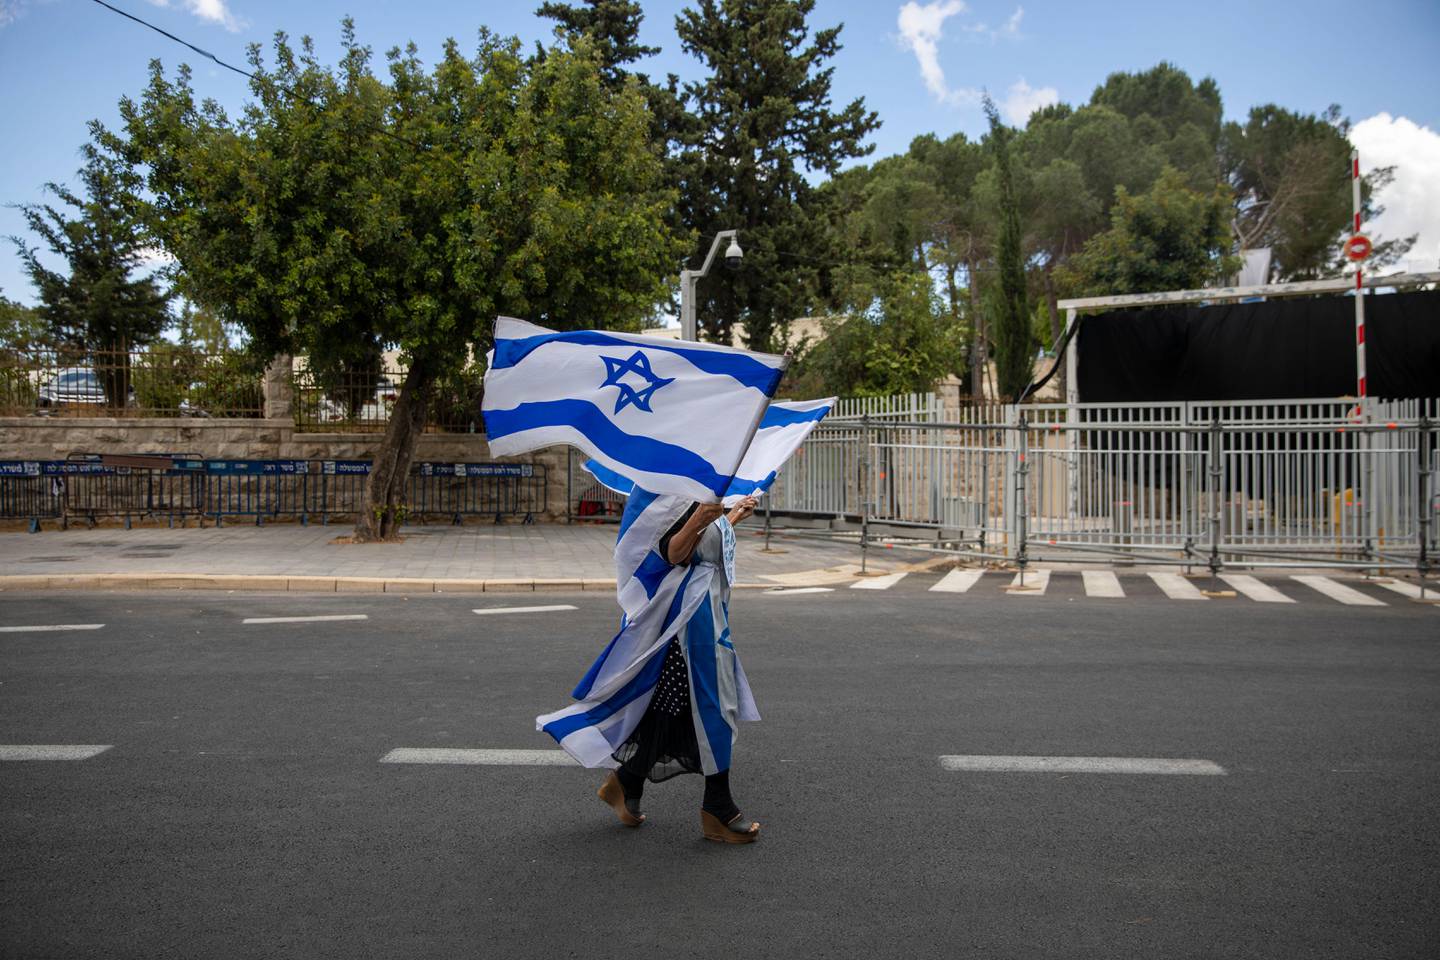 A supporter of Israel's Prime Minister Benjamin Netanyahu waves flags outside his residence in Jerusalem, Sunday, May 24, 2020. Hundreds of protesters calling him the "crime minister" demonstrated outside his official residence, while hundreds of supporters, including leading members of his Likud party, rallied in support of him at the courthouse. Netanyahu faces charges of fraud, breach of trust, and accepting bribes in a series of corruption cases. (AP Photo/Ariel Schalit)